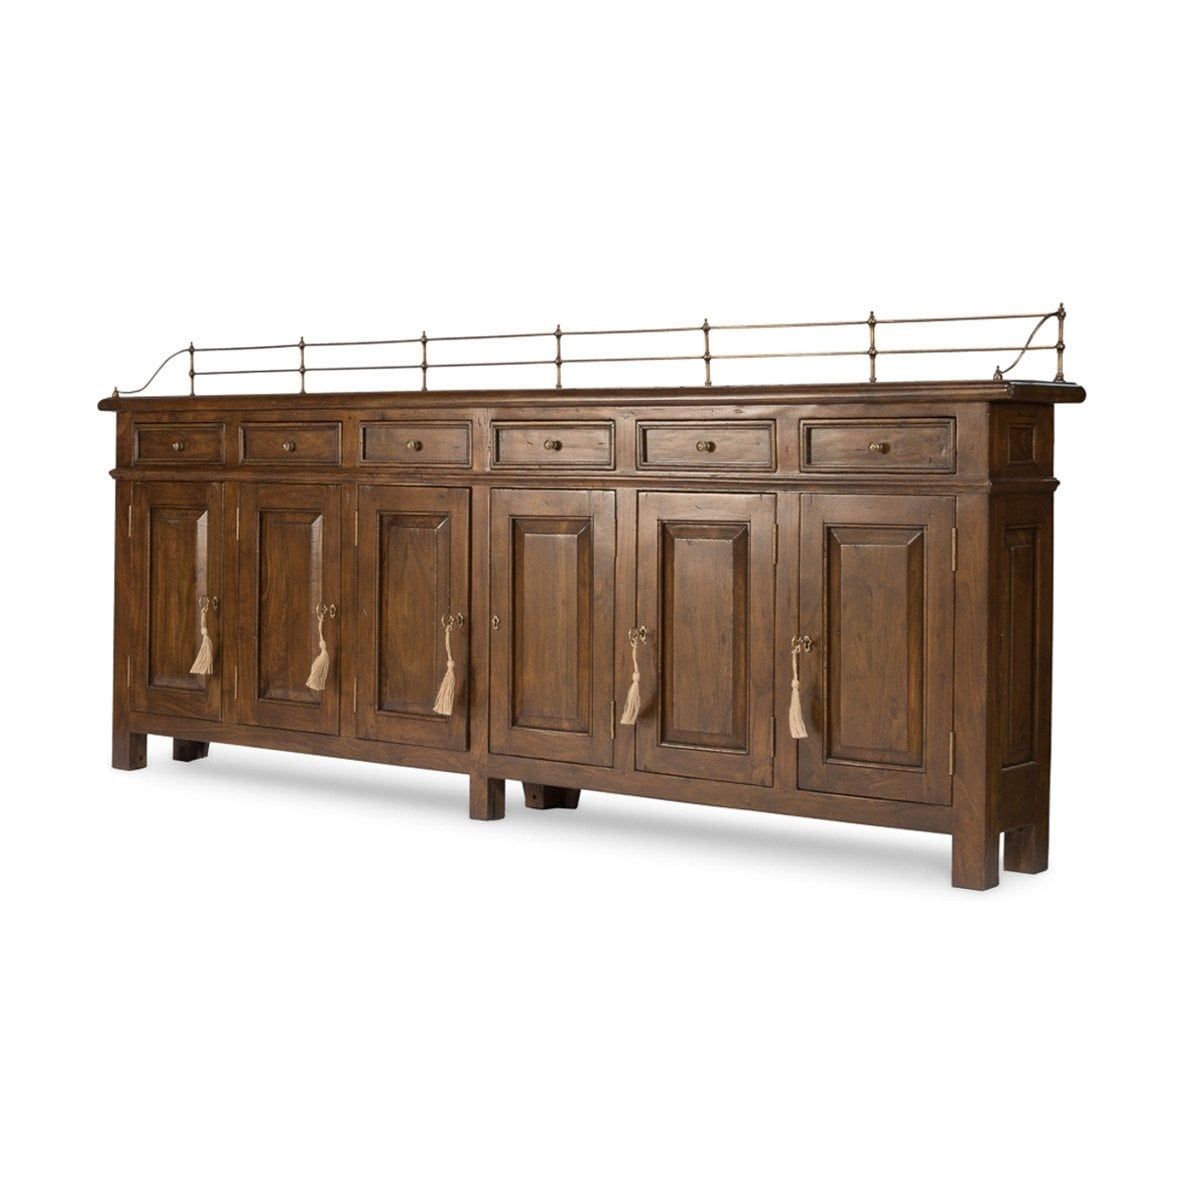 High Quality Sideboards And Buffets Made Of Mahogany, Walnut And More Inside Most Current Brown Wood 72 Inch Sideboards (View 20 of 20)